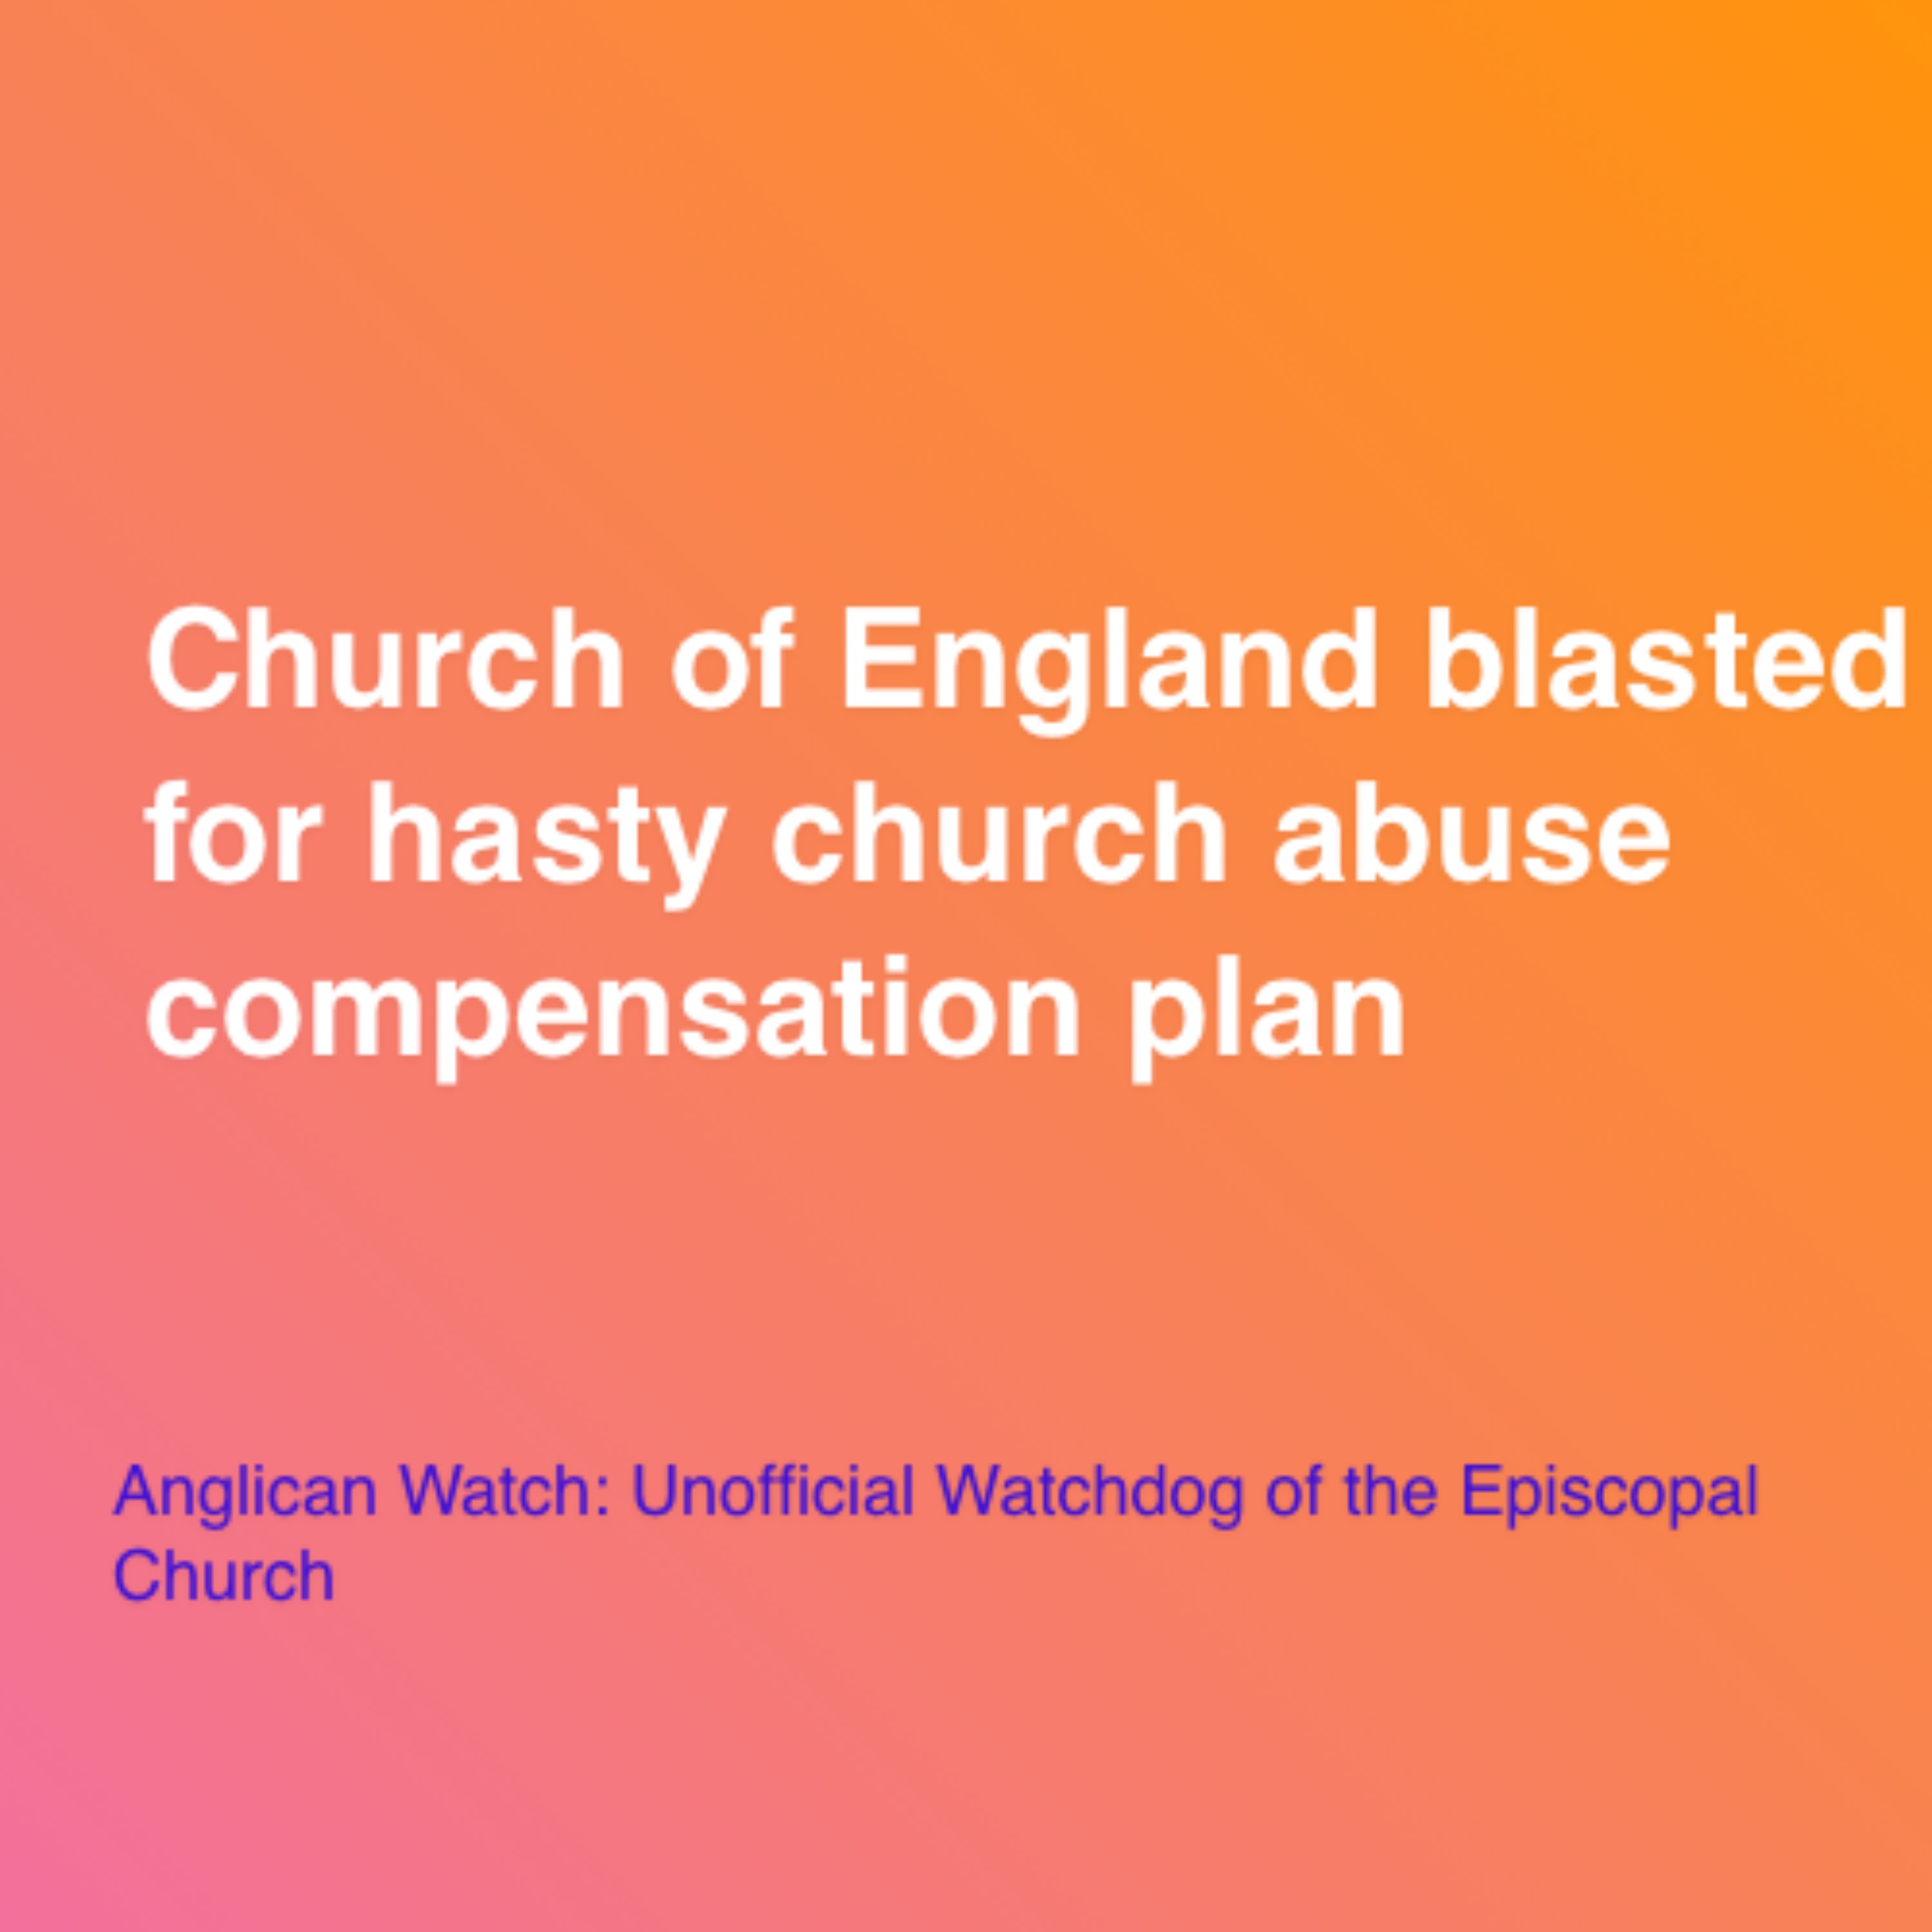 Church of England blasted for hasty church abuse compensation plan